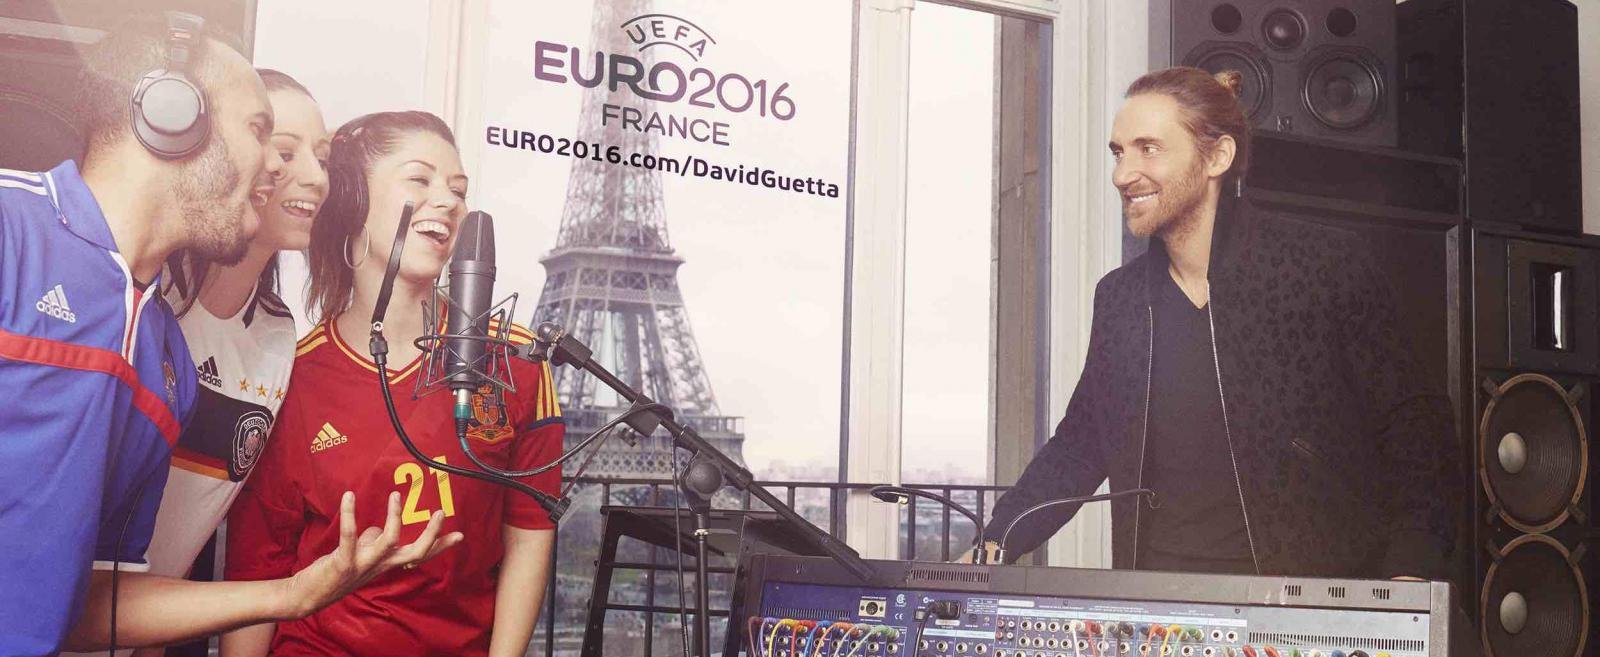 David Guetta asks 1 million fans to help him record the official EURO 2016 song